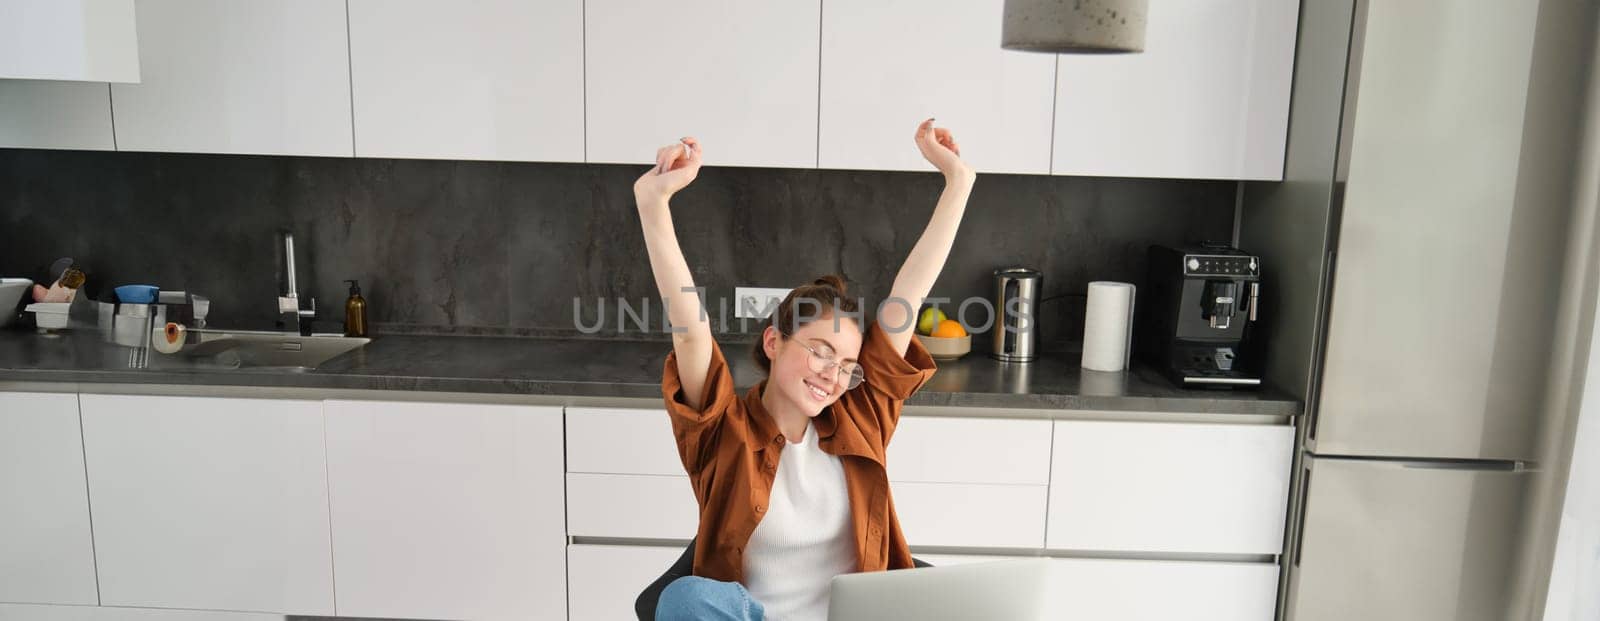 Productivity and lifestyle concept. Beautiful young woman finishes working, stretching hands with satisfied expression, sitting in kitchen with laptop and documents, has remote workplace at home.